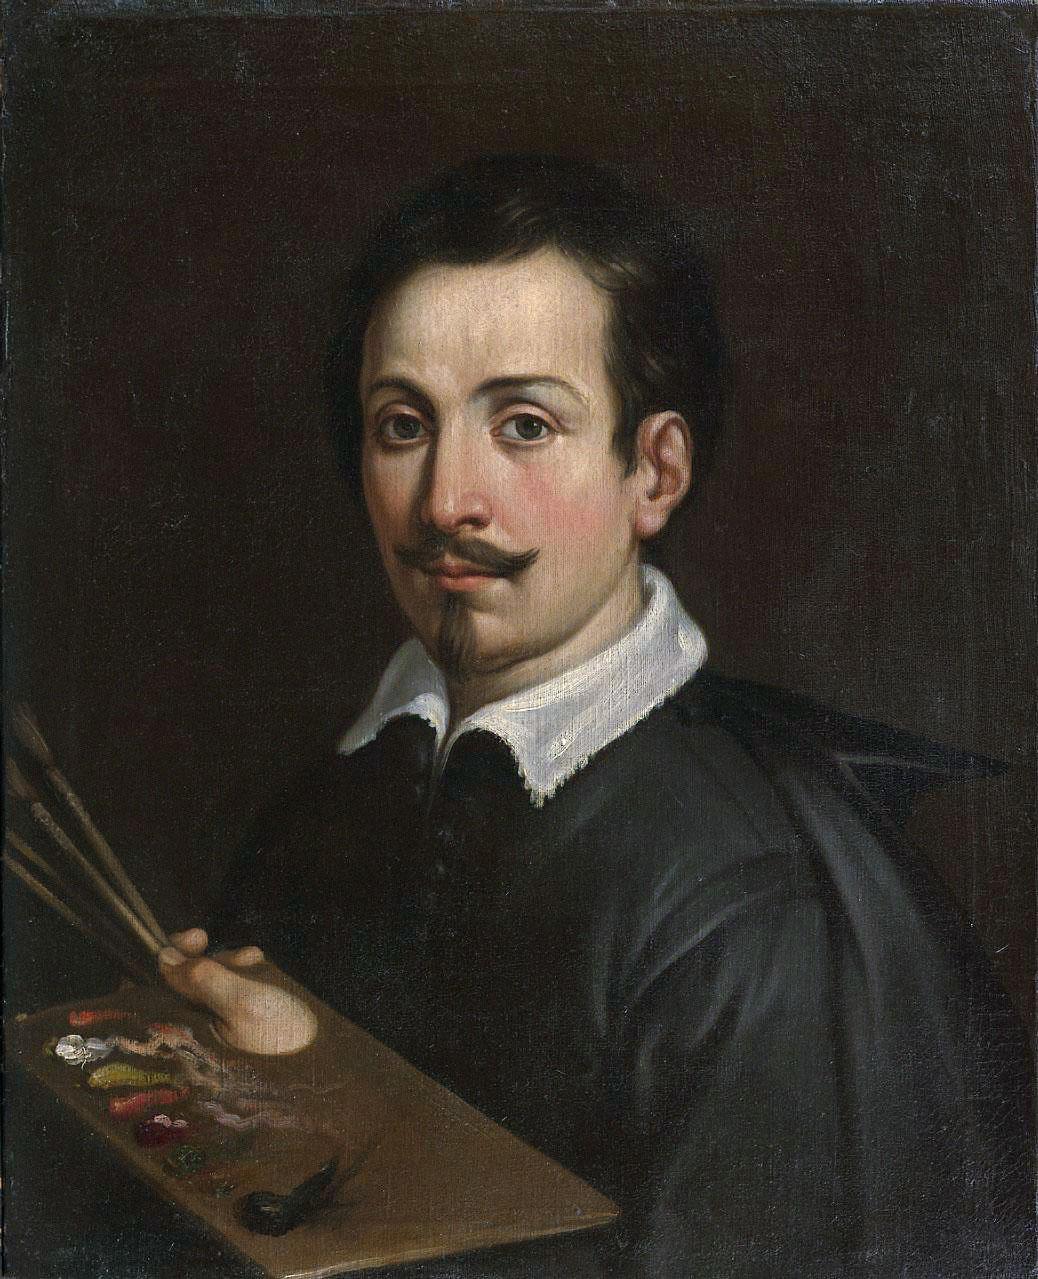 Artist's self-portrait, circa 1602–1623, by Guido Reni. Oil on canvas; 25.3 inches by 20.4 inches. (Public Domain)